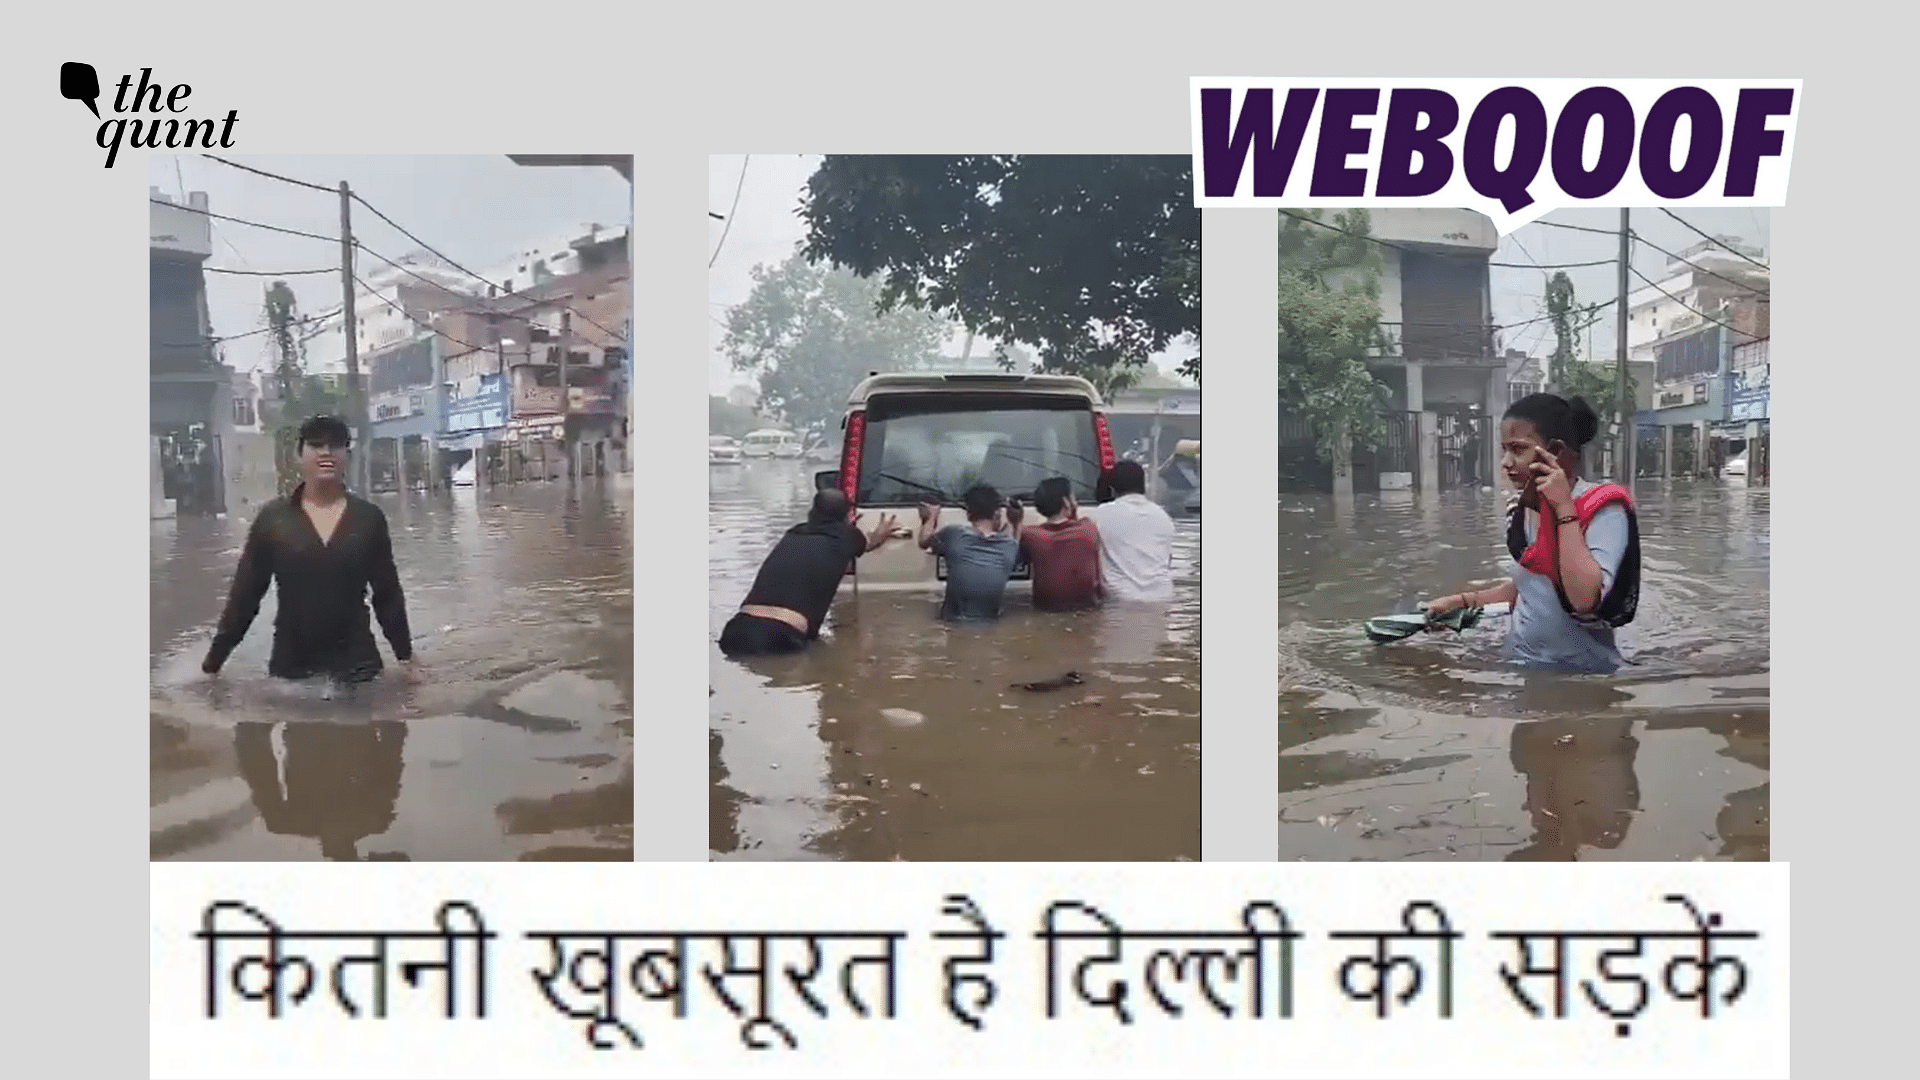 <div class="paragraphs"><p>Fact-check : The claim states that the video shows waterlogged roads of Delhi. </p></div>